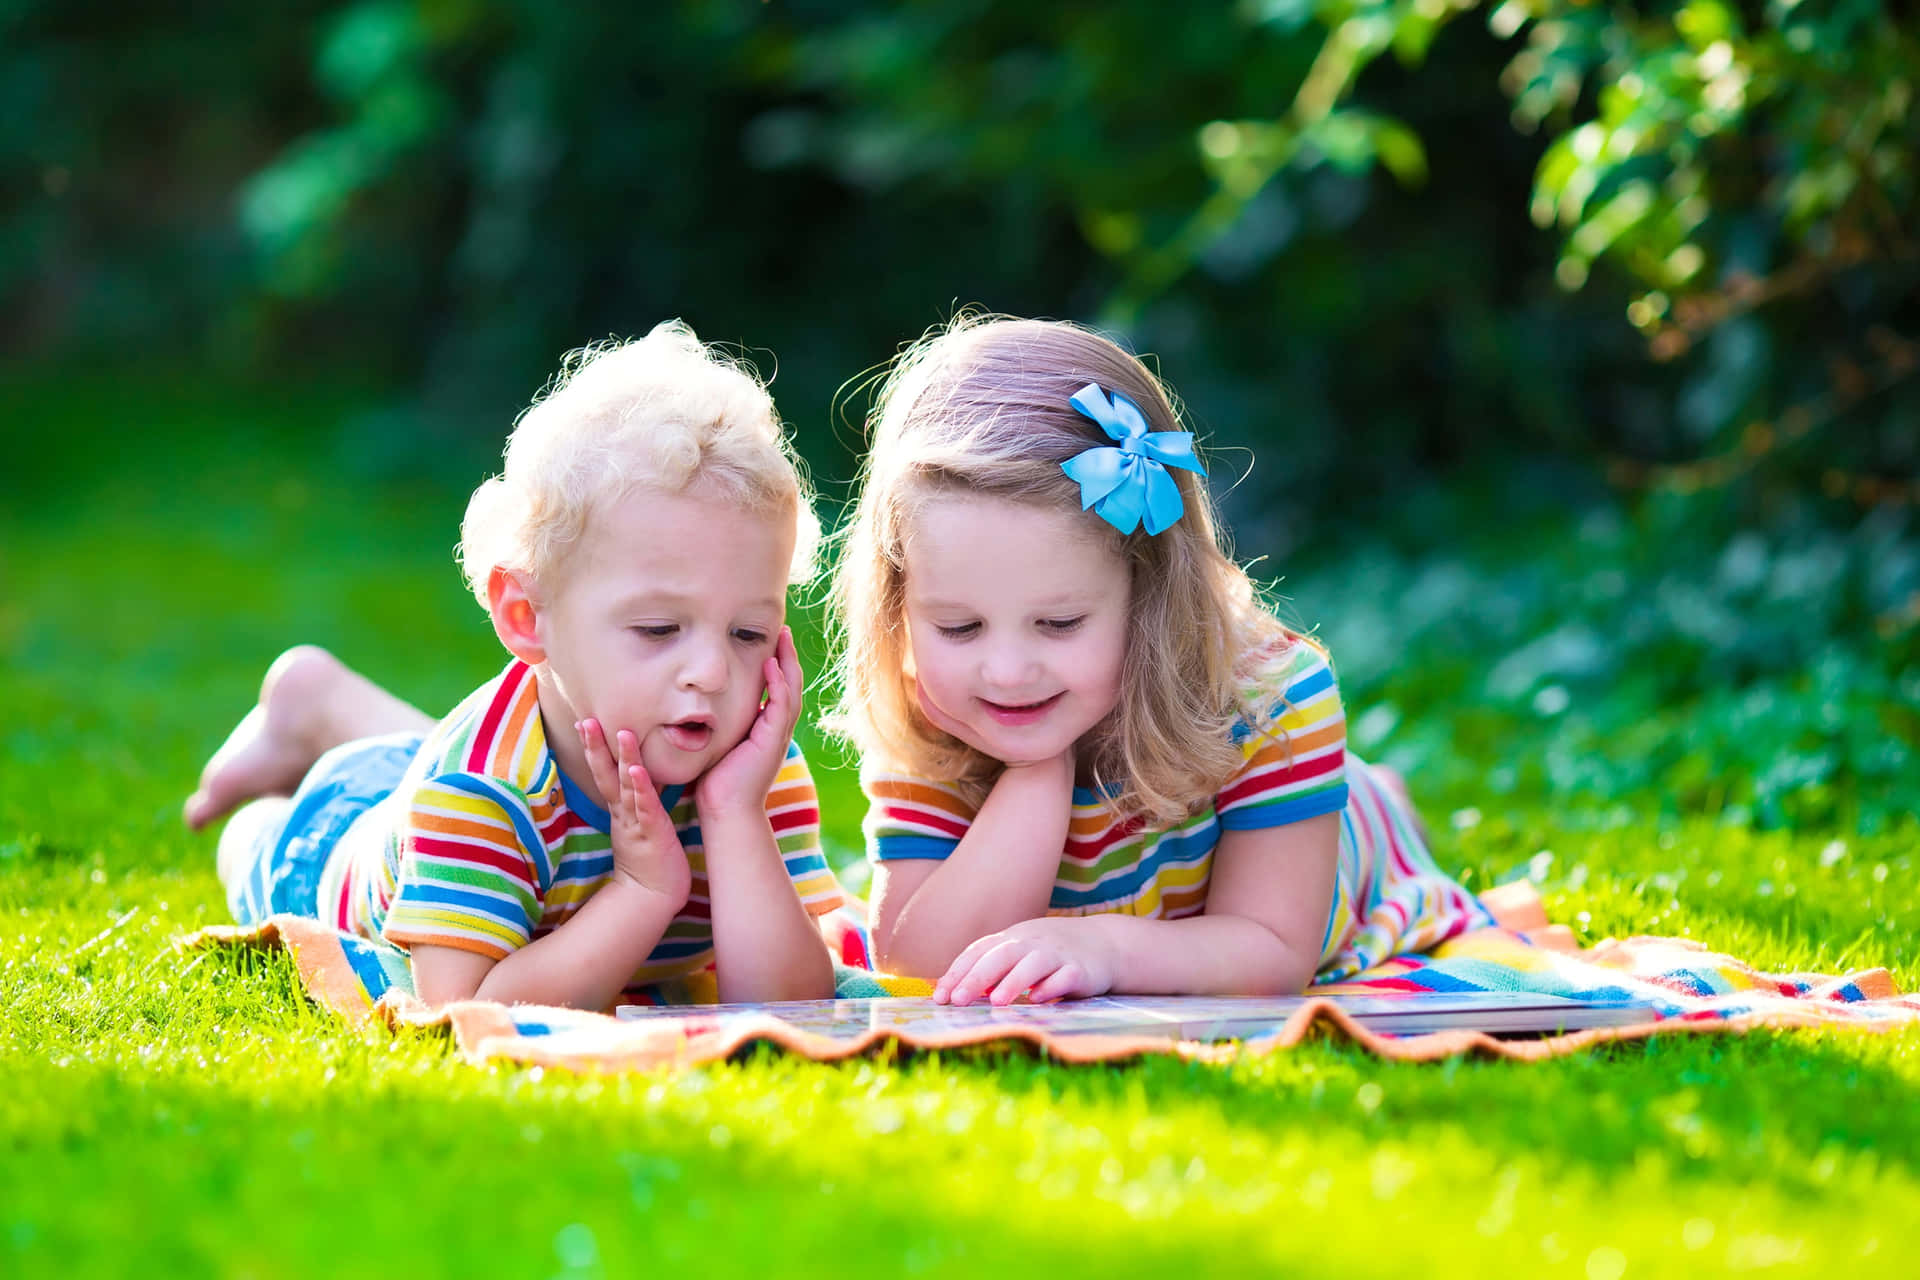 Adorable kids playing together outdoors Wallpaper